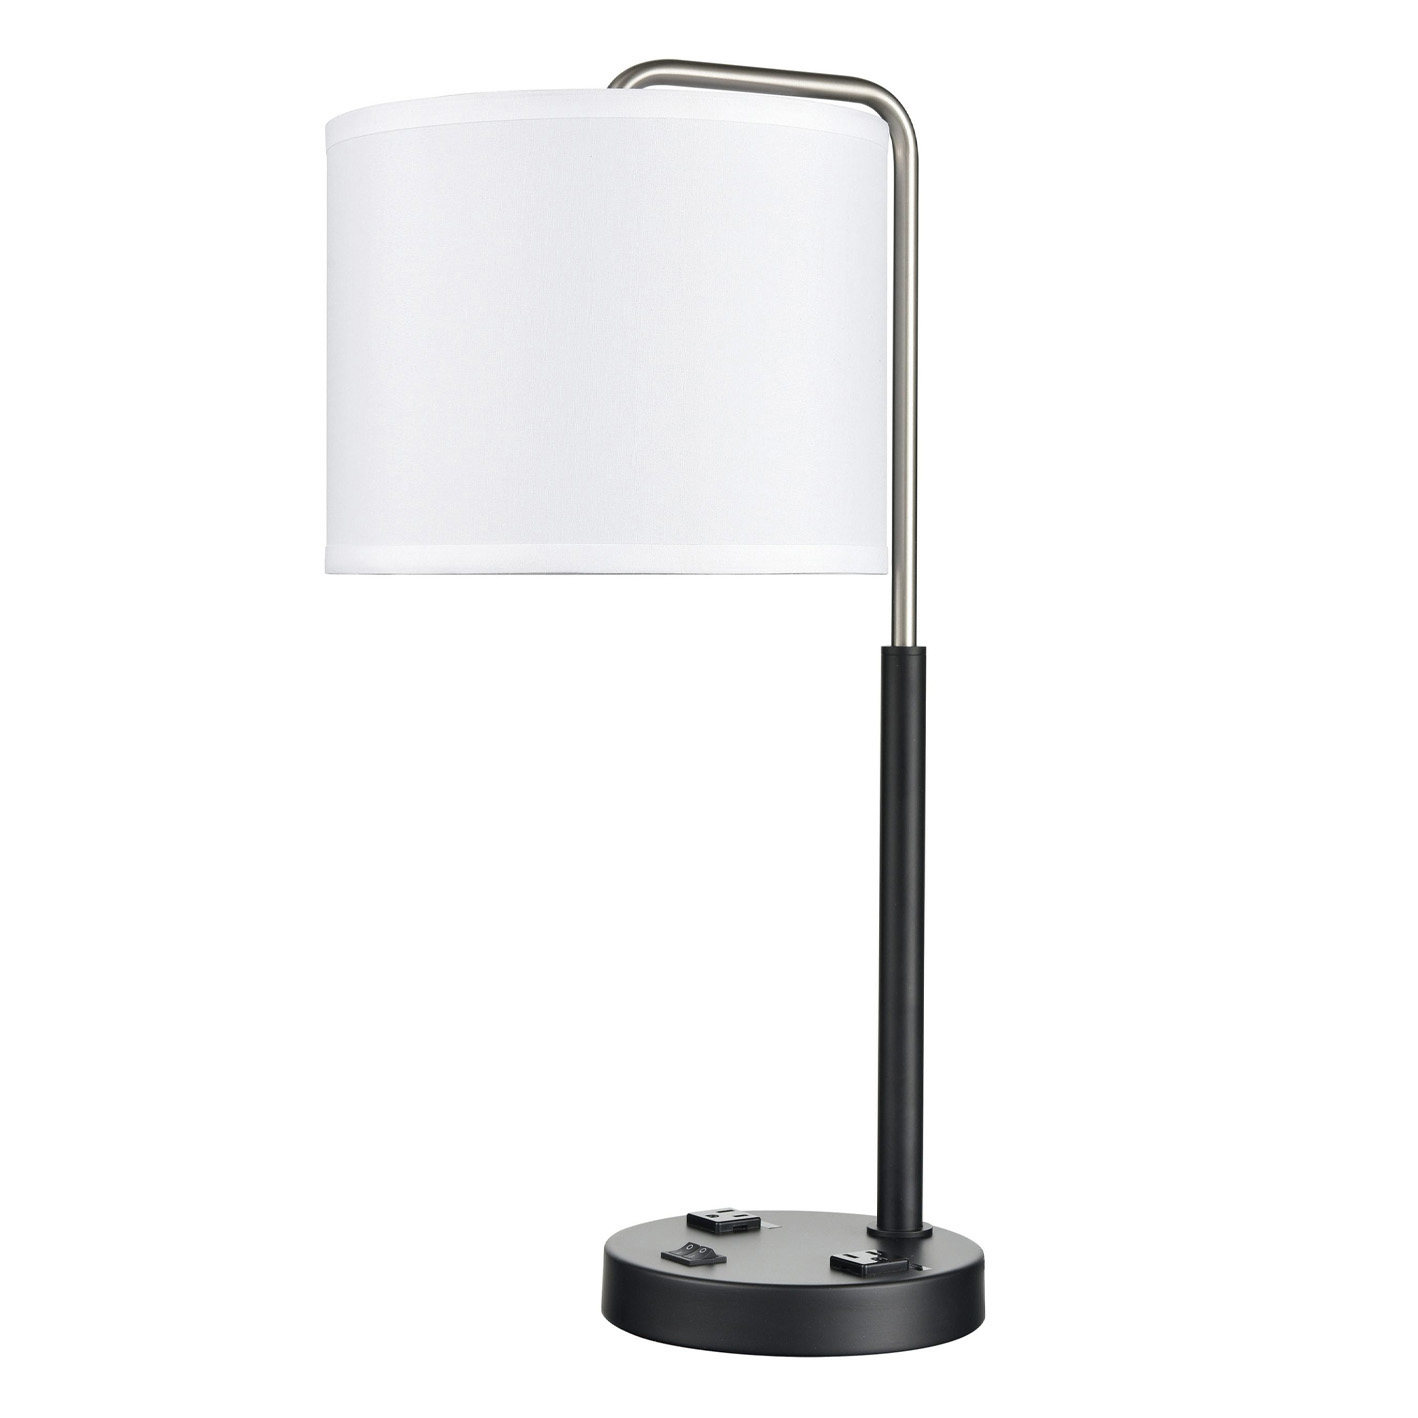 Table Lamp Brushed Nickel-Powder Coated Matte Black With two Outlet